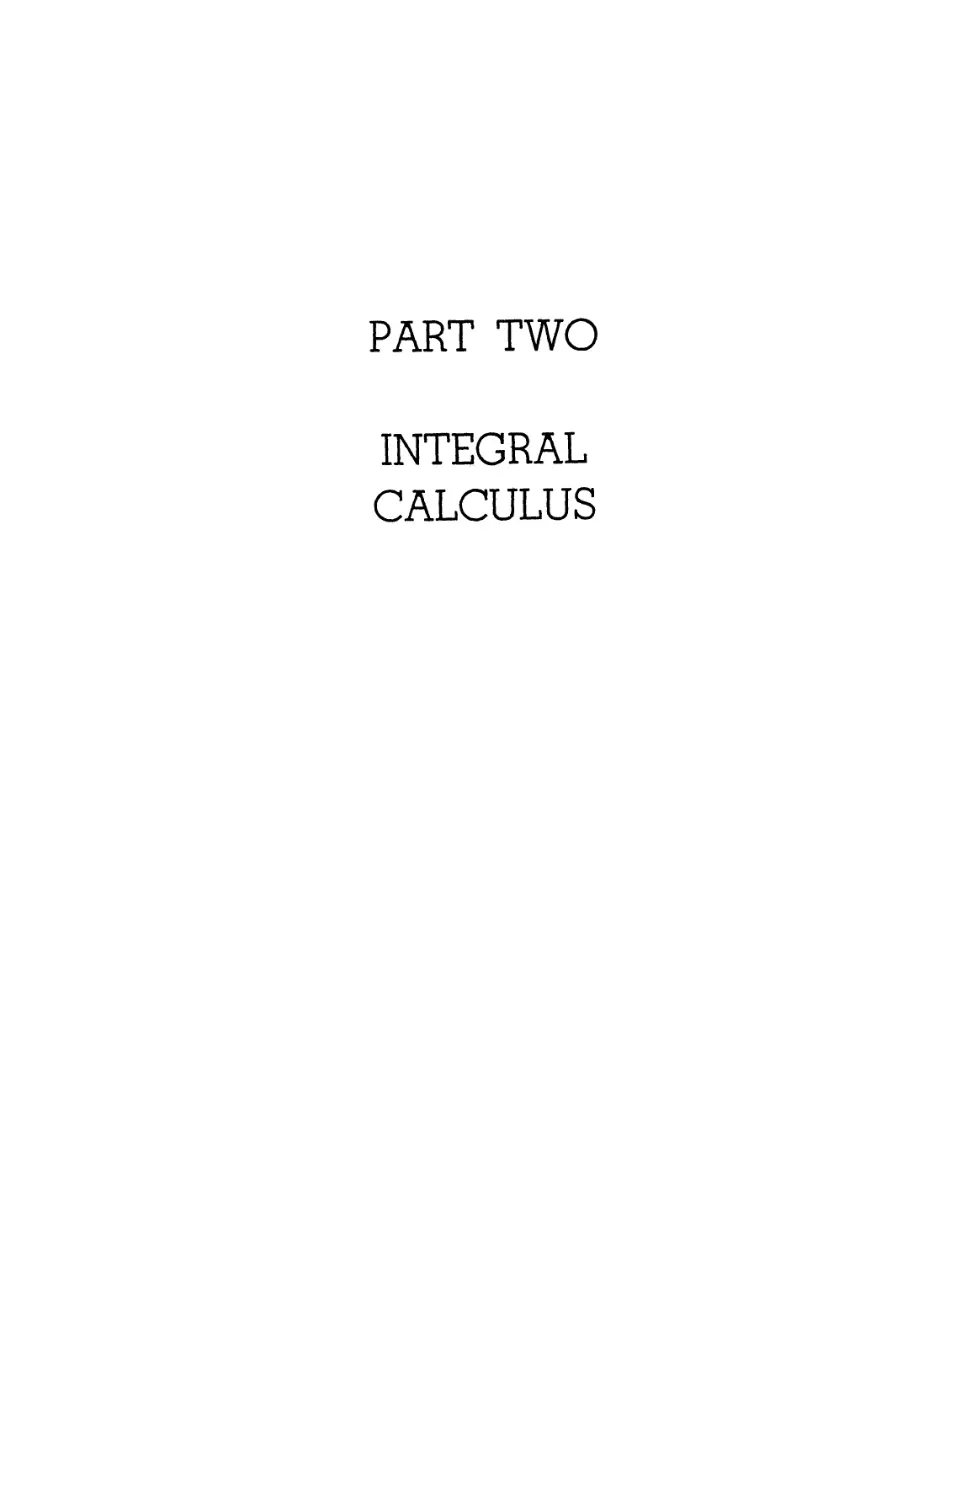 PART TWO. INTEGRAL CALCULUS